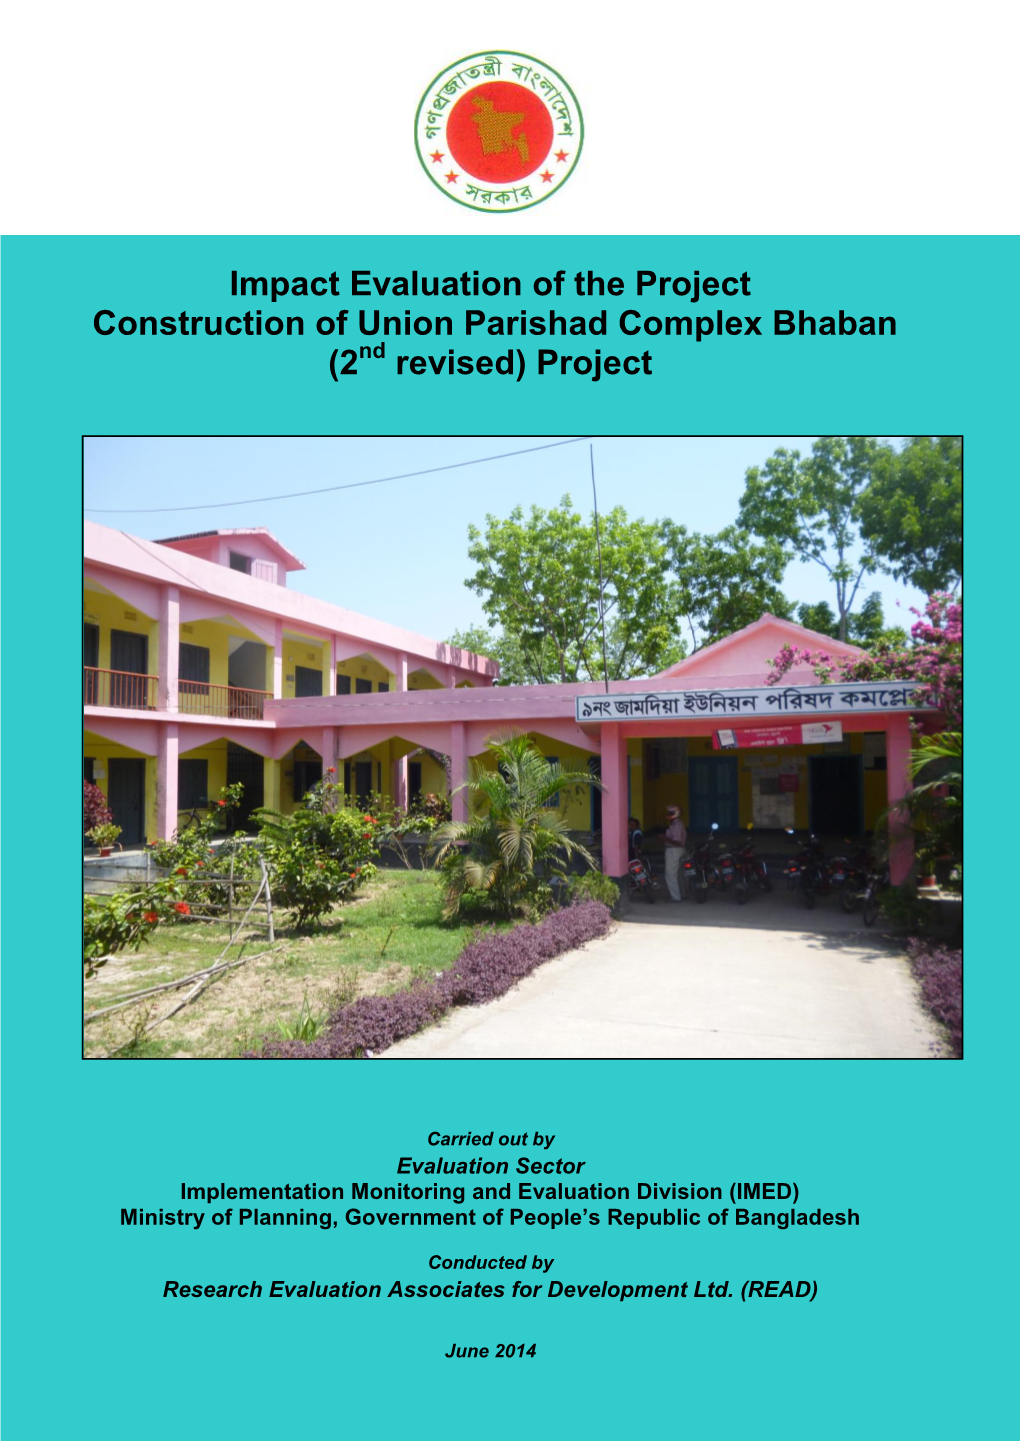 Impact Evaluation of the Project Construction of Union Parishad Complex Bhaban (2Nd Revised) Project